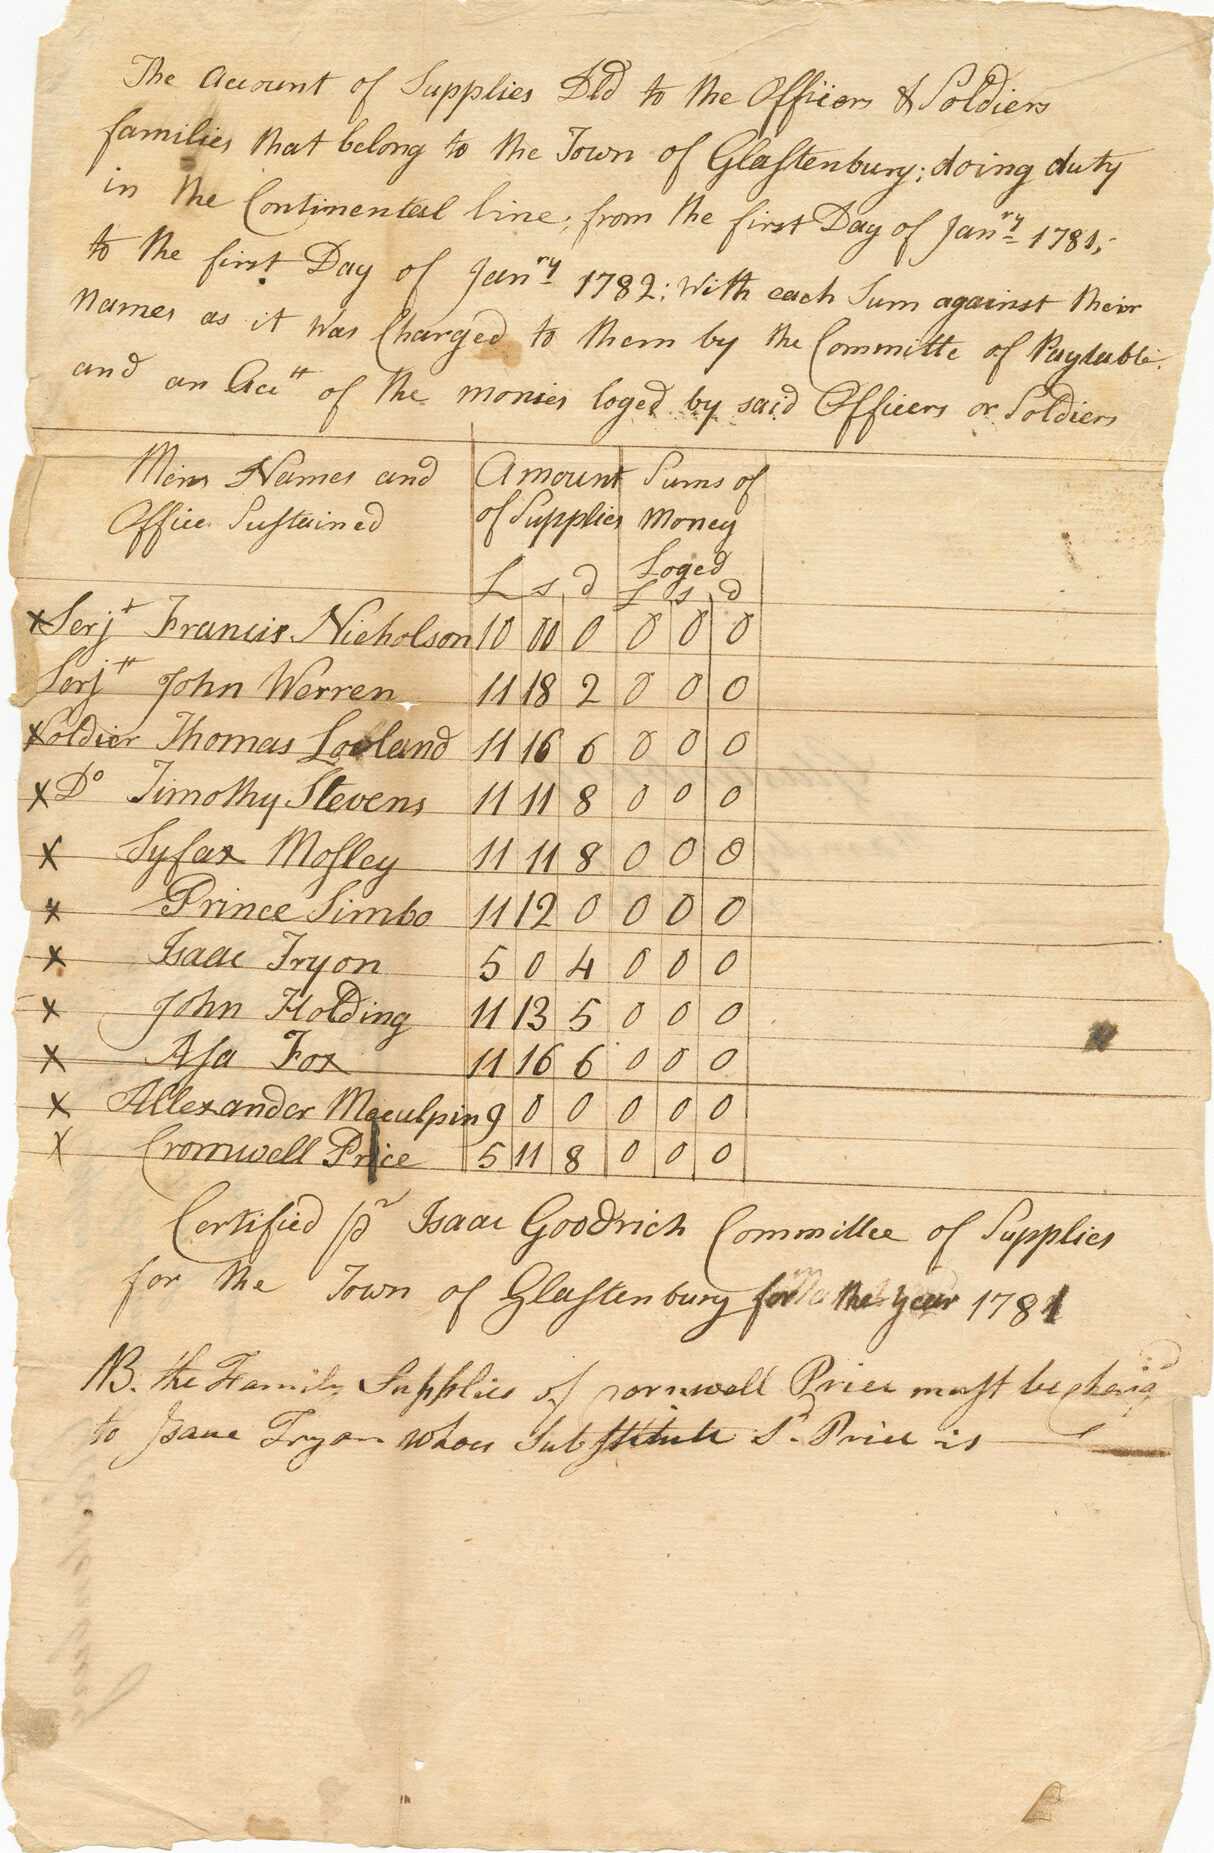 A single-sheet document of handwritten brown ink on off-white paper that lists soldiers, both black and white, and the cost of supplies for each man for the year 1781. The document begins at the top with [The Account of Supplies (illegible) to the Officers + Soldiers / families that belong to the Town of Glastonbury; doing duty in the Continental Line]. The bulk of the page consists of a table listing the men's names, amounts of supplies, and sums of money. The names begin with Sergeants Francis Nicholson and John Warren and continue with the soldiers Thomas Looland, Timothy Stevens, Syfax Mosley, Prince Simbo, Isaac Tryon, John Holding, Asa Fox, Alexander Macuplin, and Cromwell Price. Written at center of the verso is [Glastonbury / Family Supplies / in 1781] and along the top left edge: [Bill of Supplies for / the Officers & Soldiers family / belong to the Town of / Glastonbury for the year / 1781 / Entered].